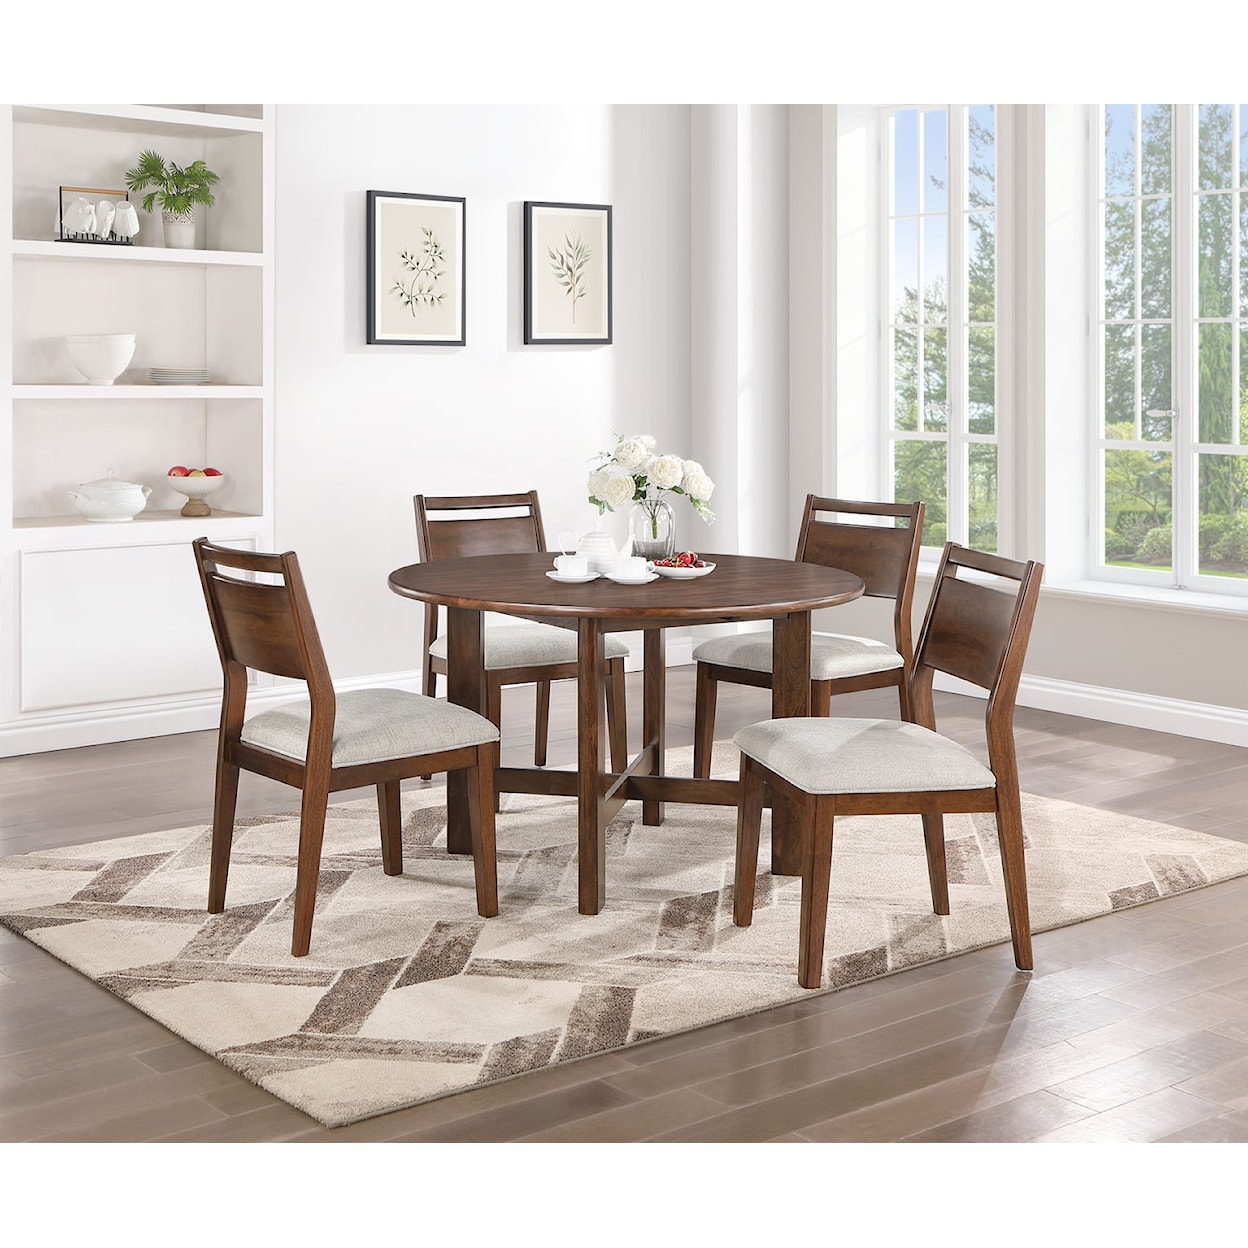 HH Paladin 5-Piece Dining Set with Round Table